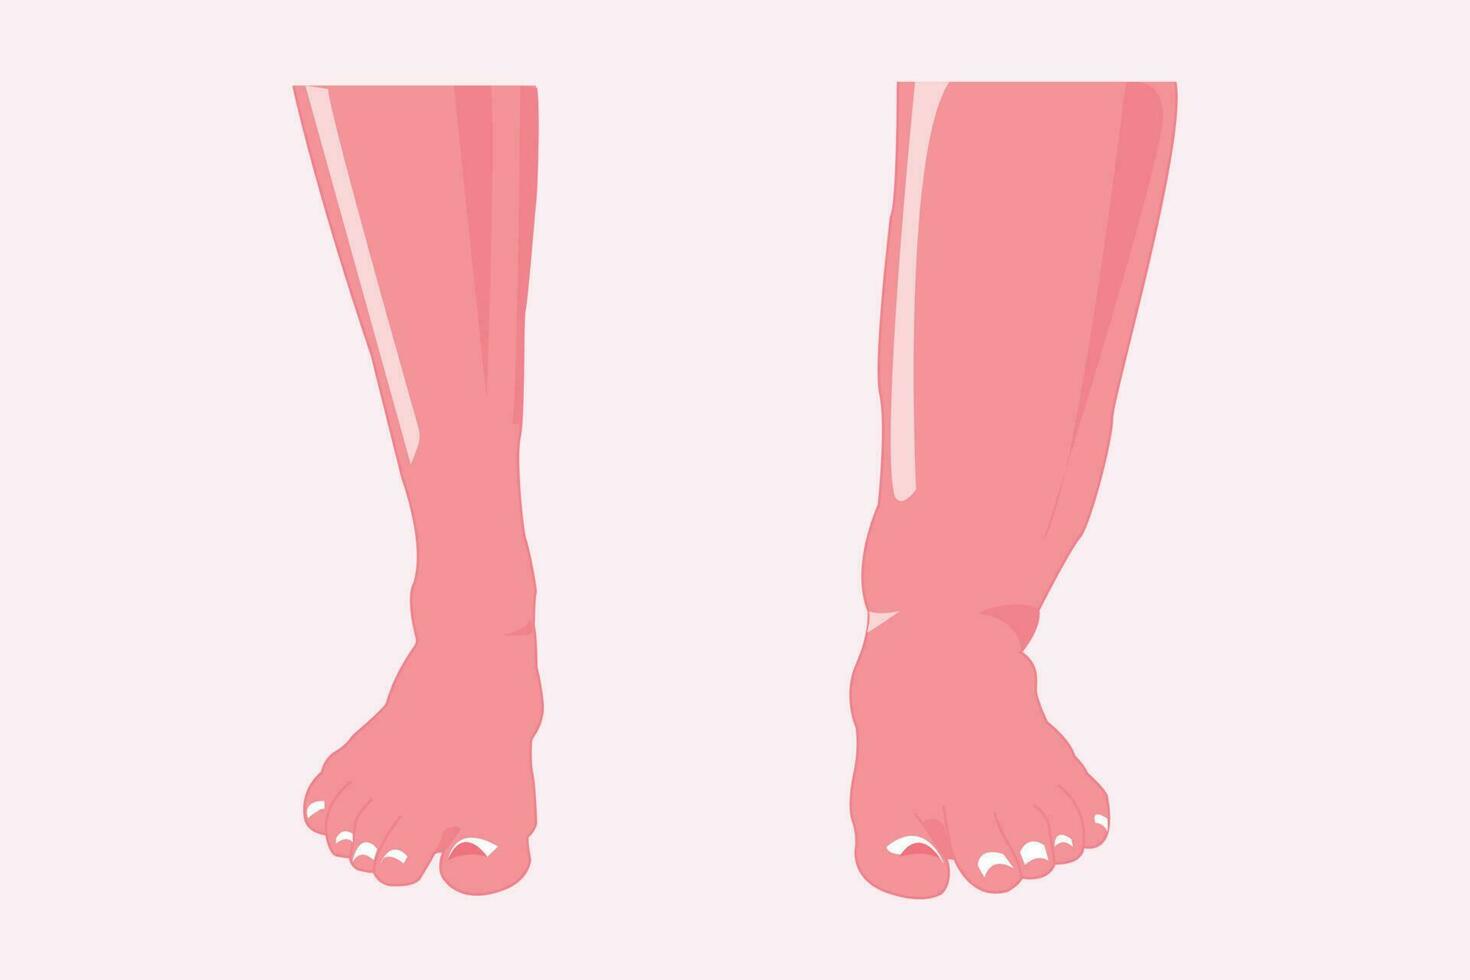 normal and abnormal foot. edema foot illustration for education. eps 10 vector